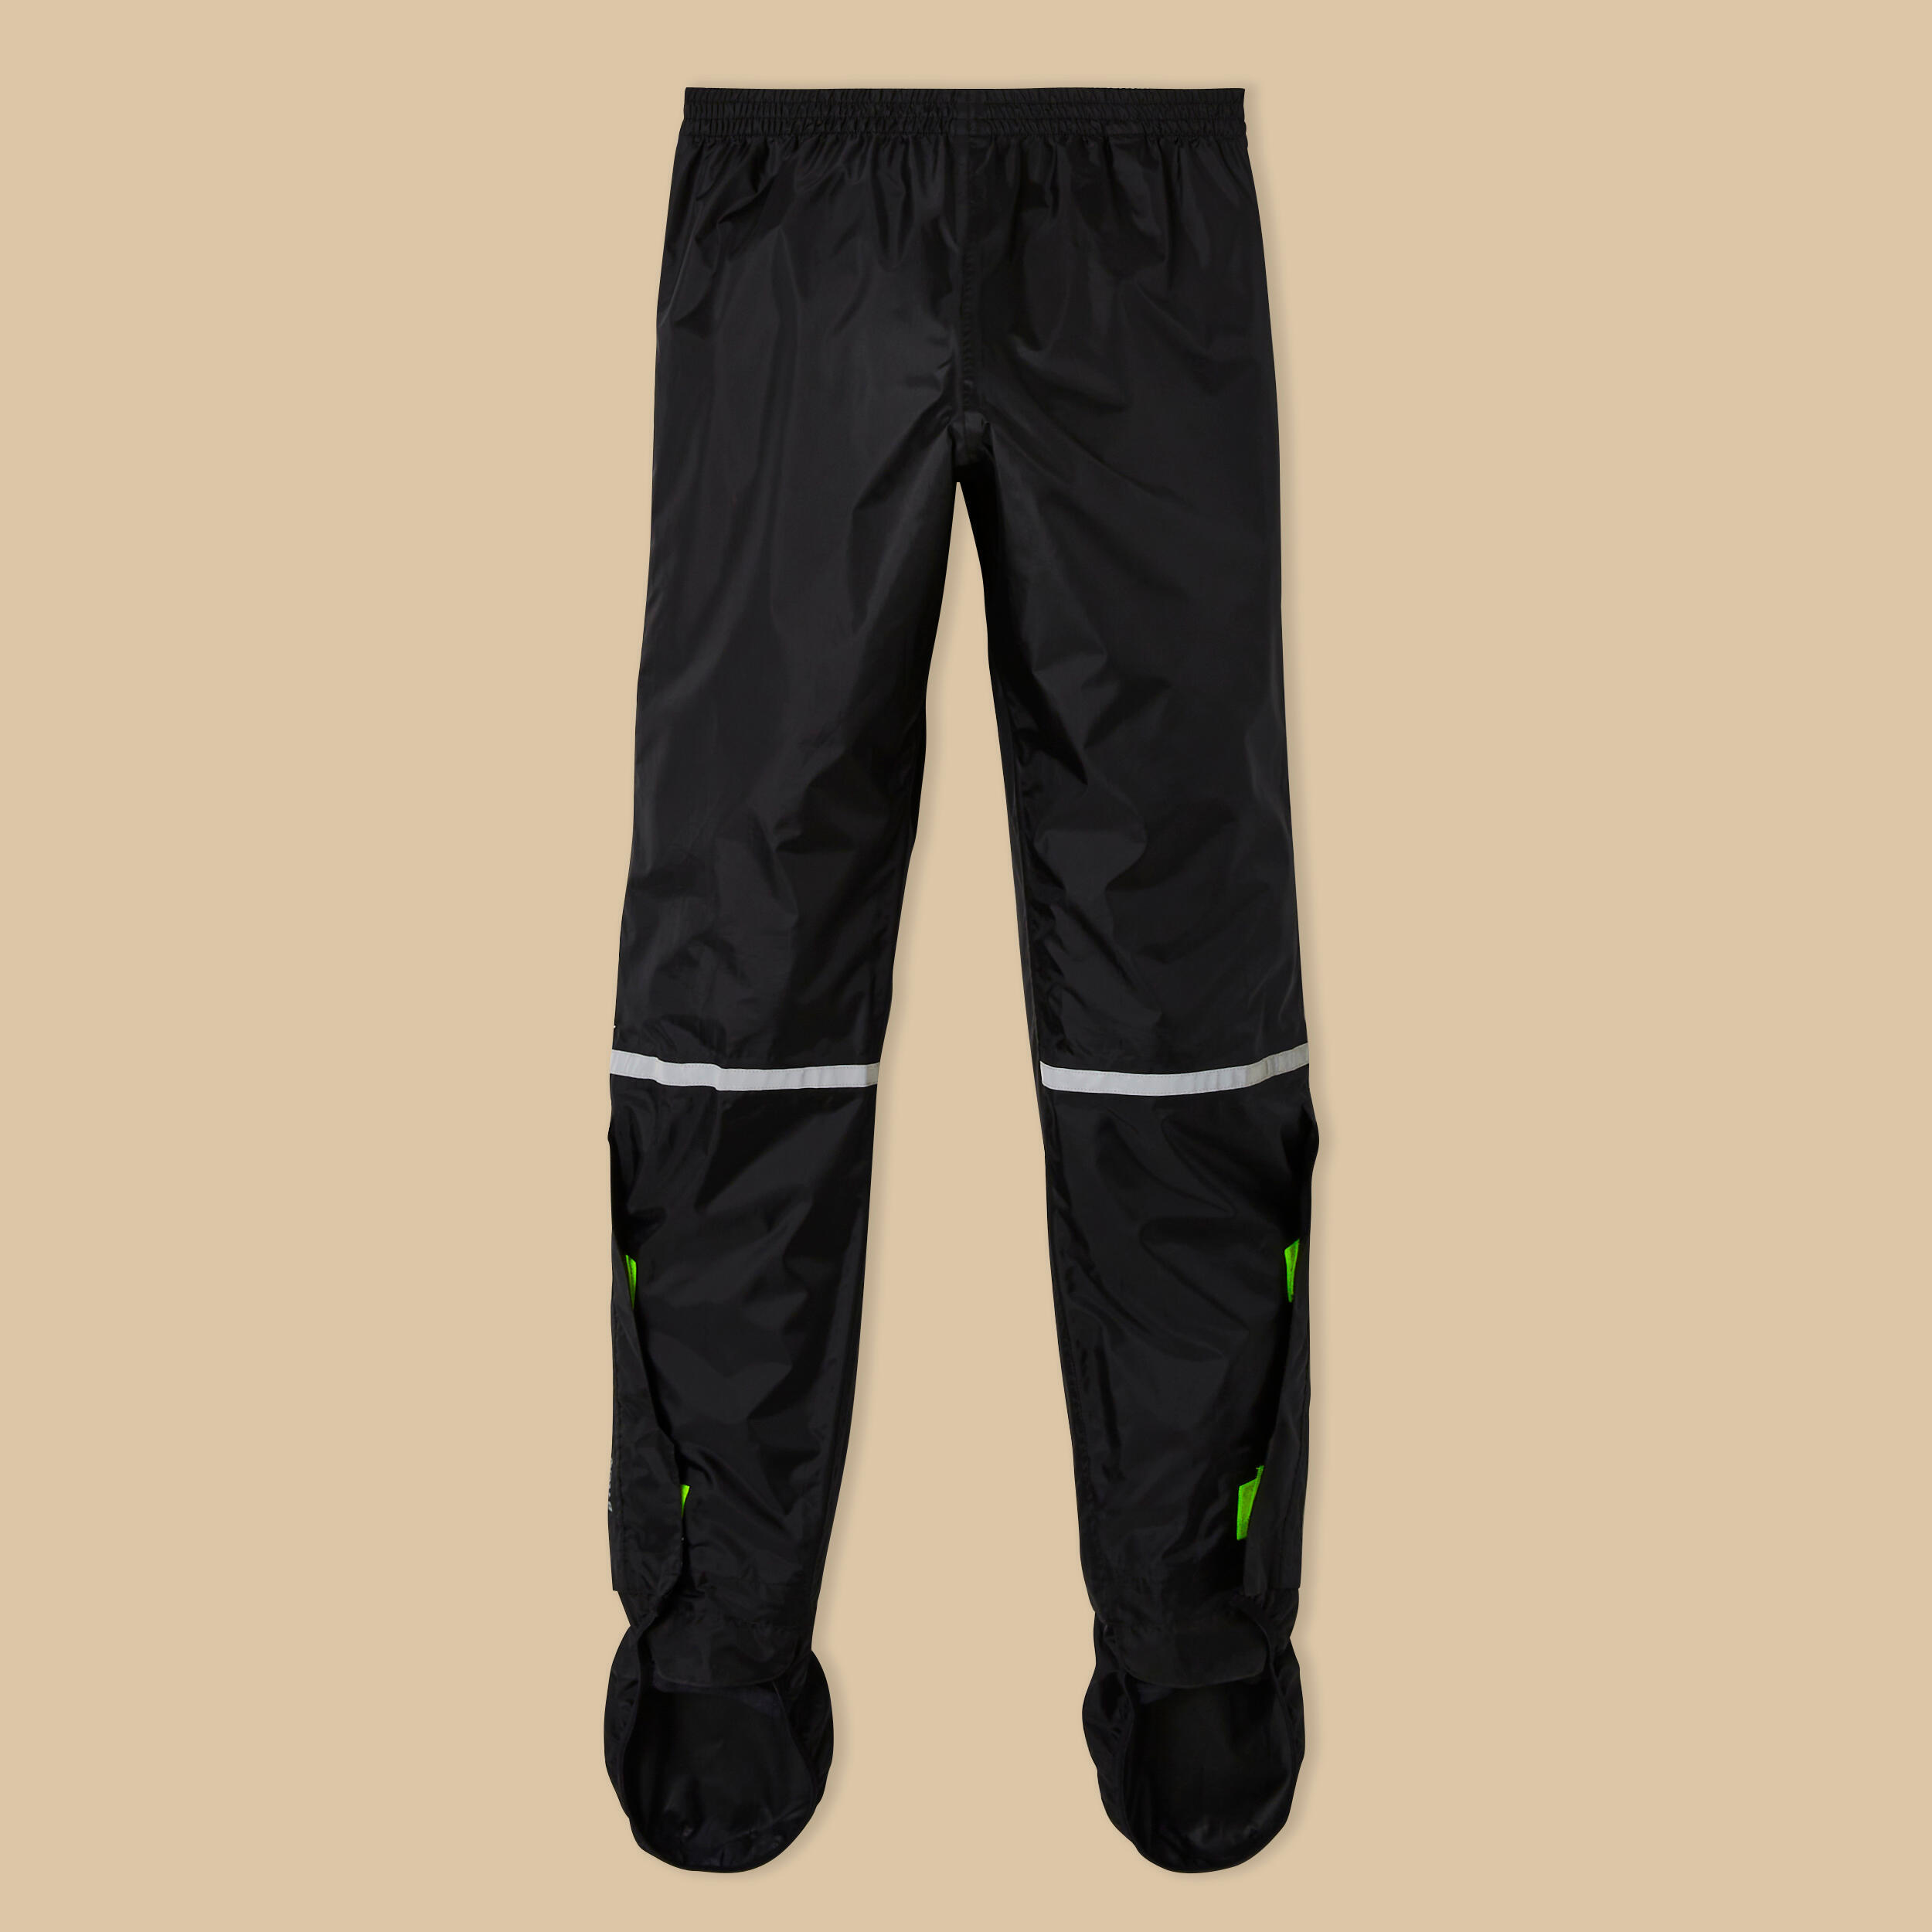 City Cycling Rain Overtrousers with Built-In Overshoes 100 - Black 12/15